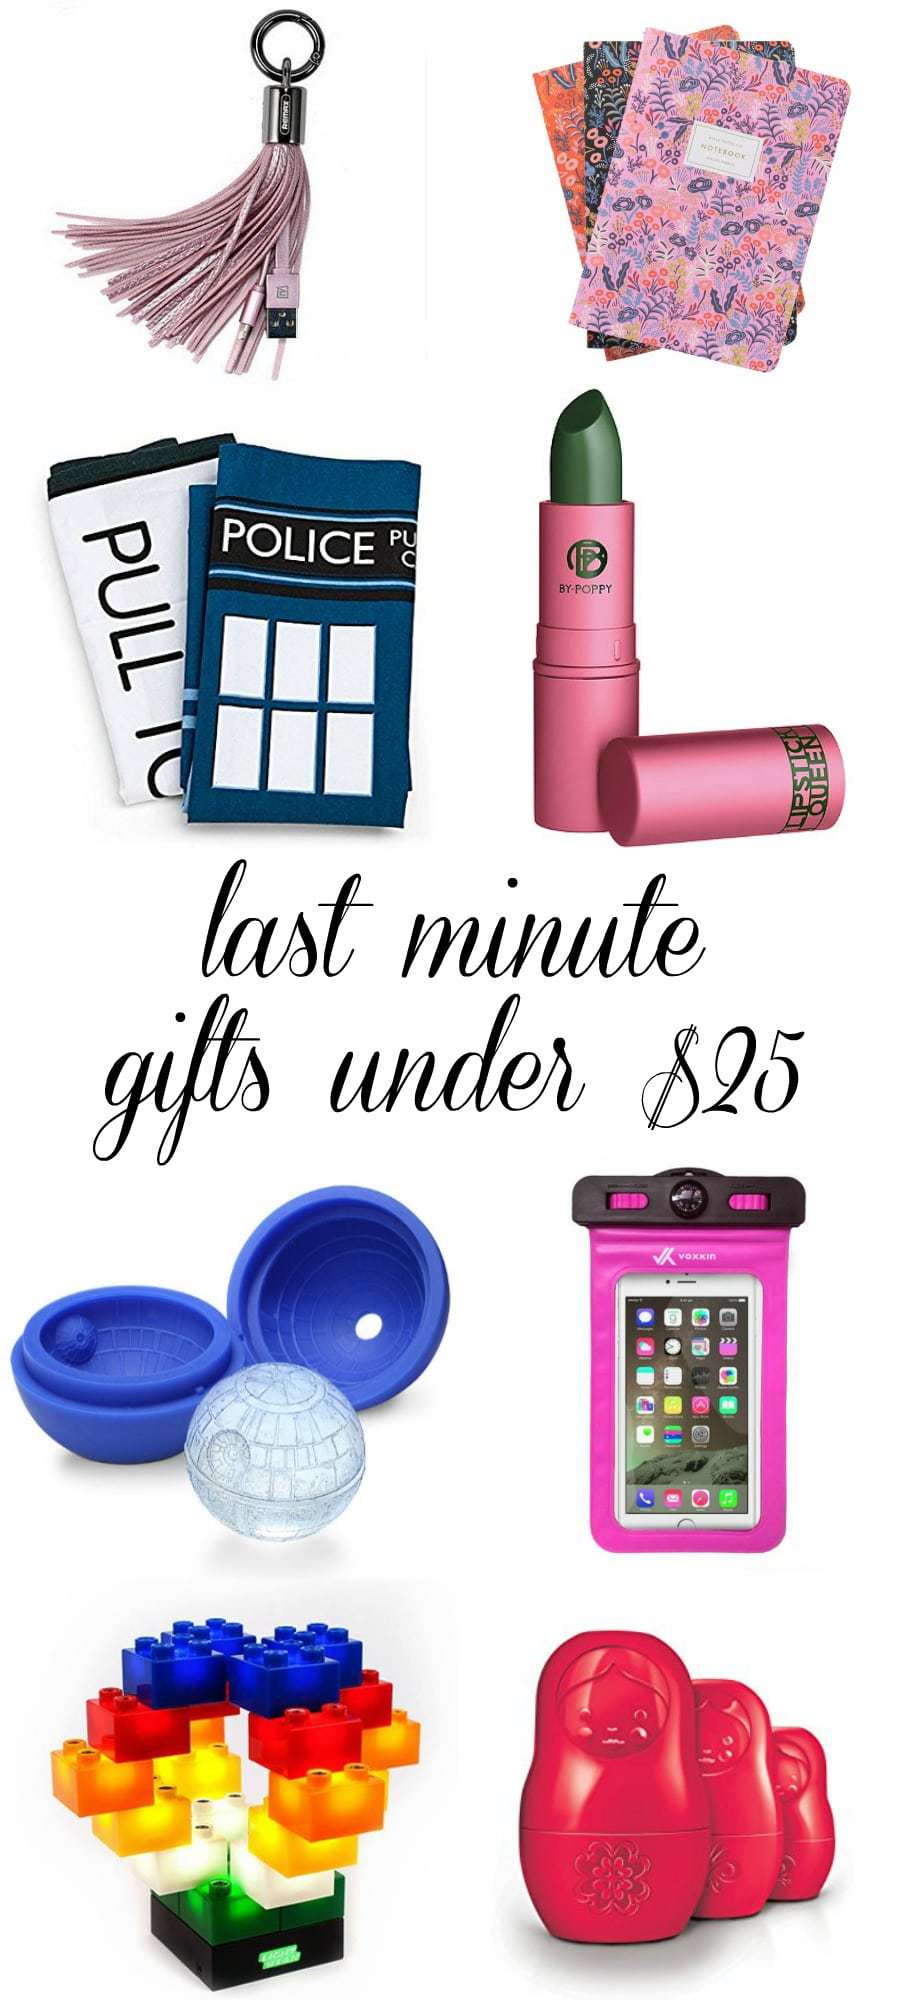 Gift Guide: Last Minute Gifts under $25